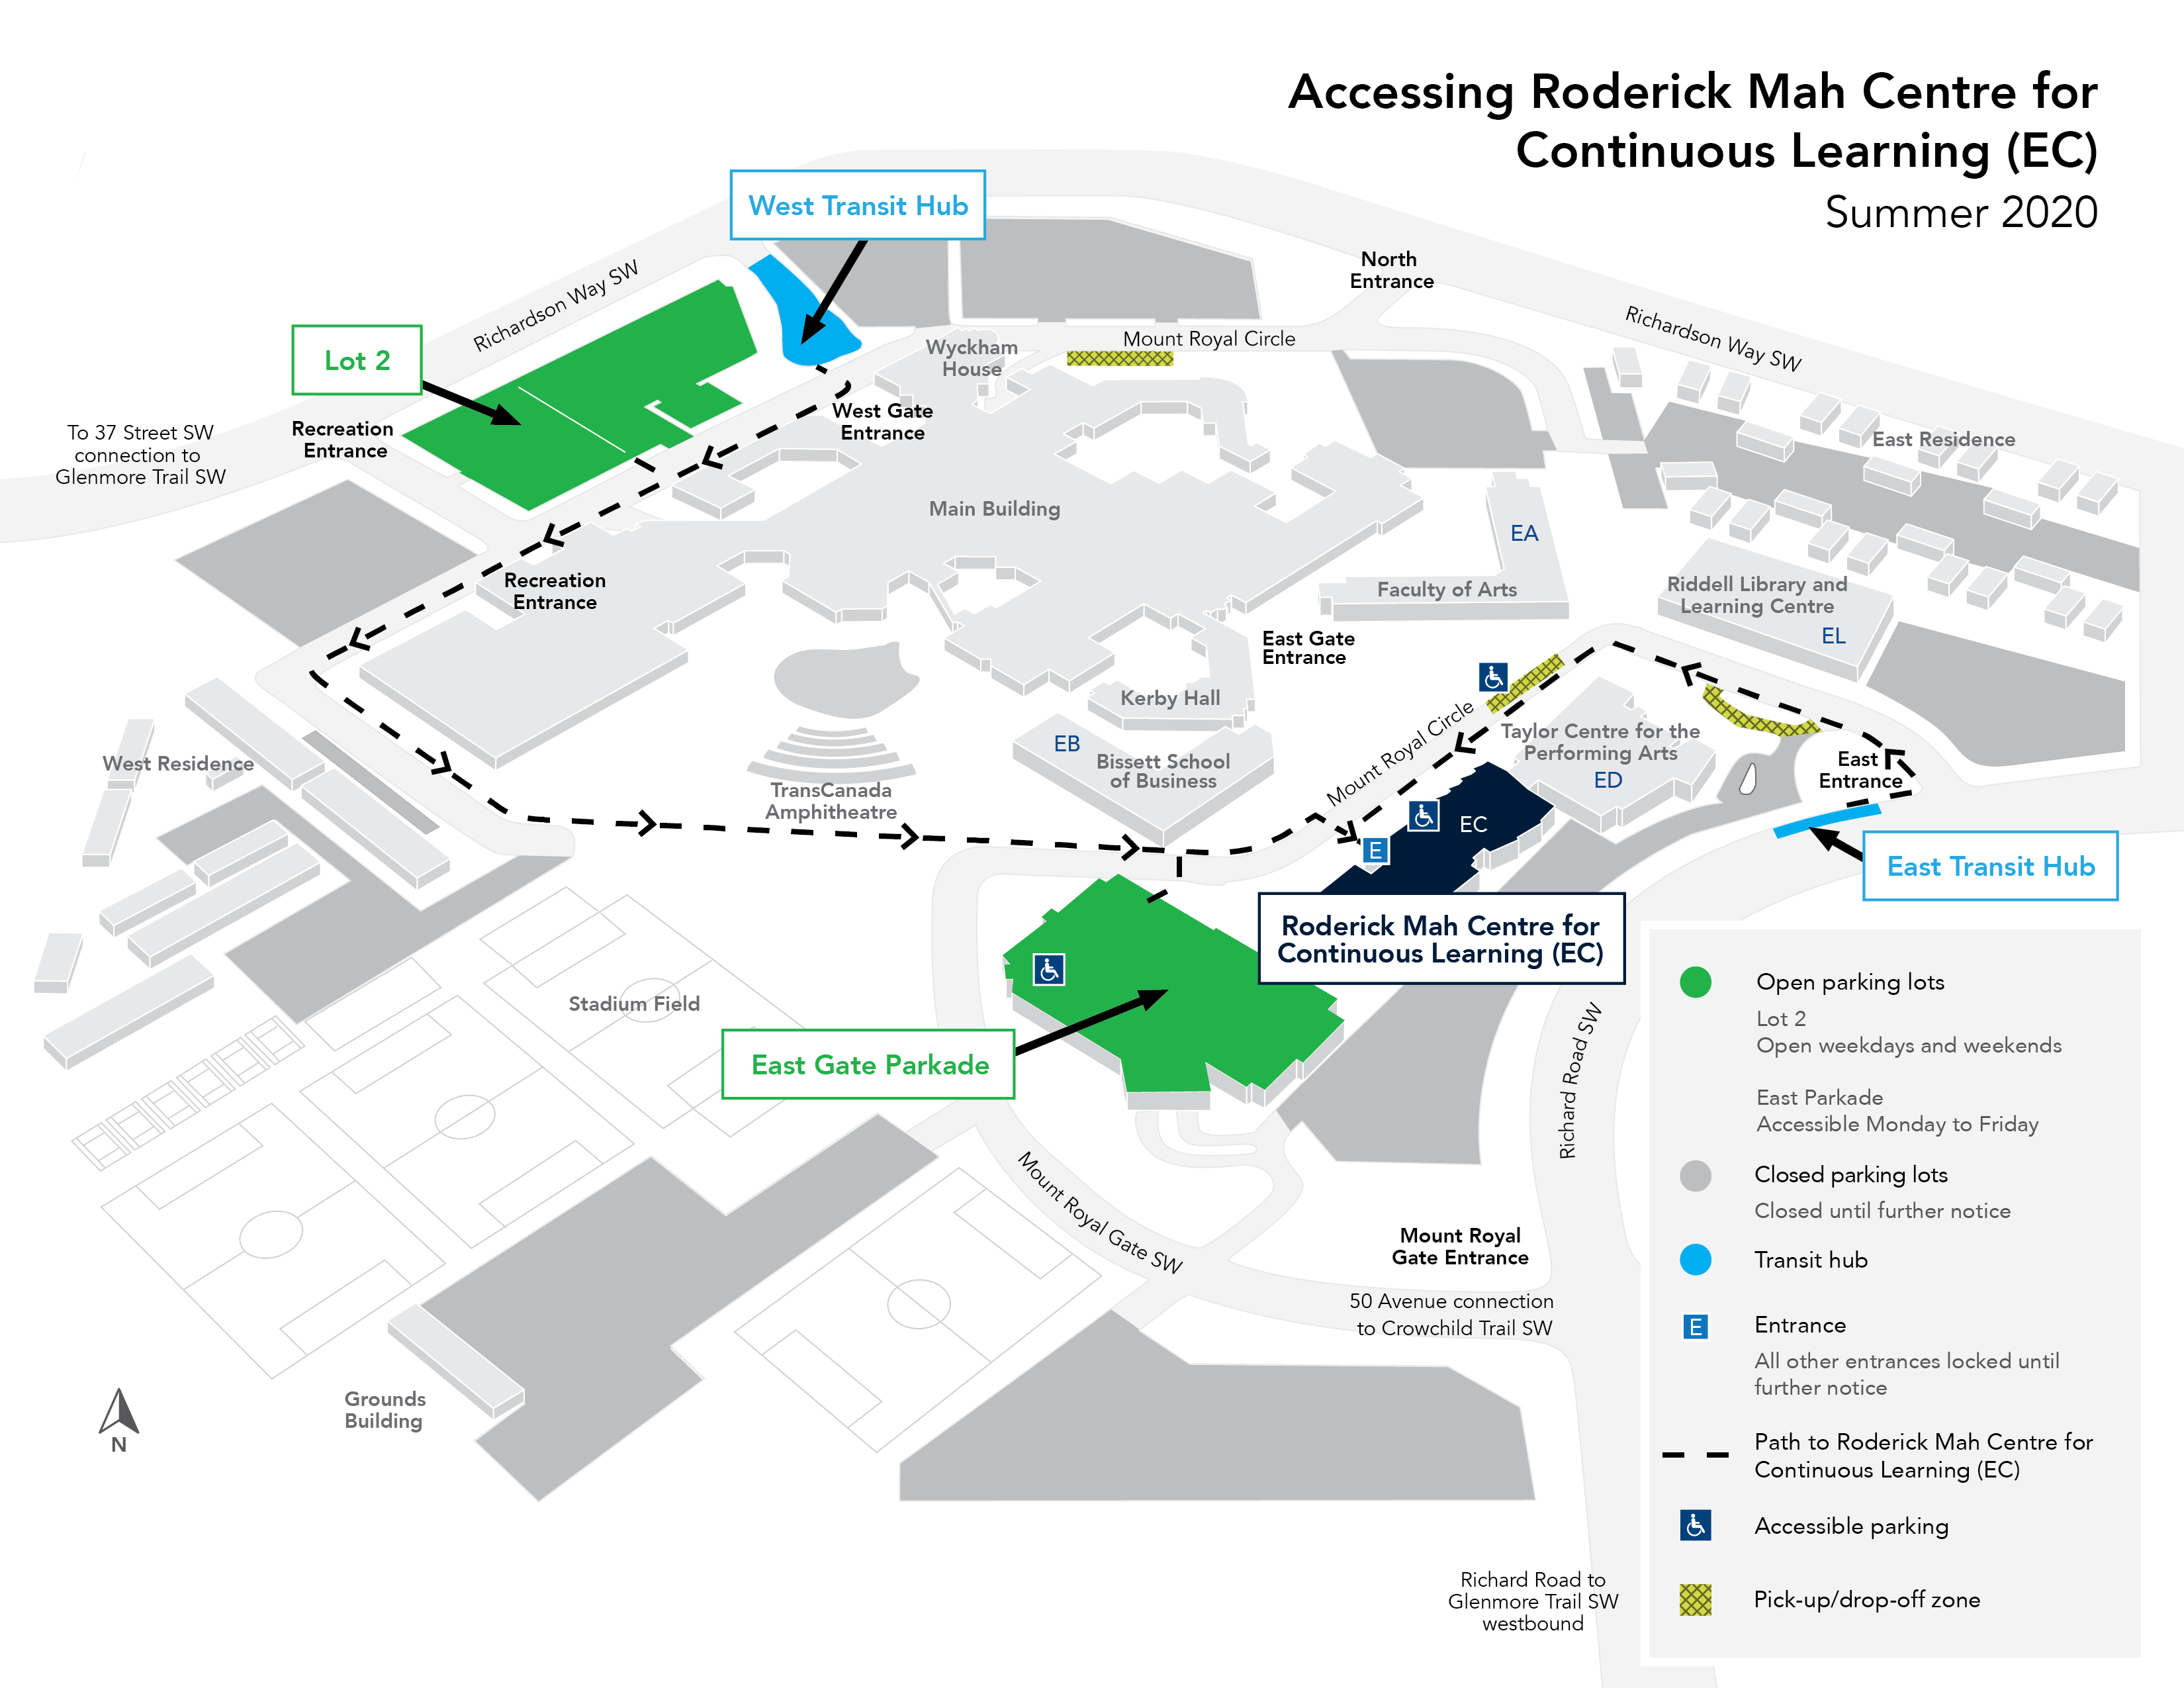 A map of campus with the East and West Transit Hubs, Lot 2, the East Gate Parkade, and the Roderick Mah Centre for Continuous Learning highlighted.